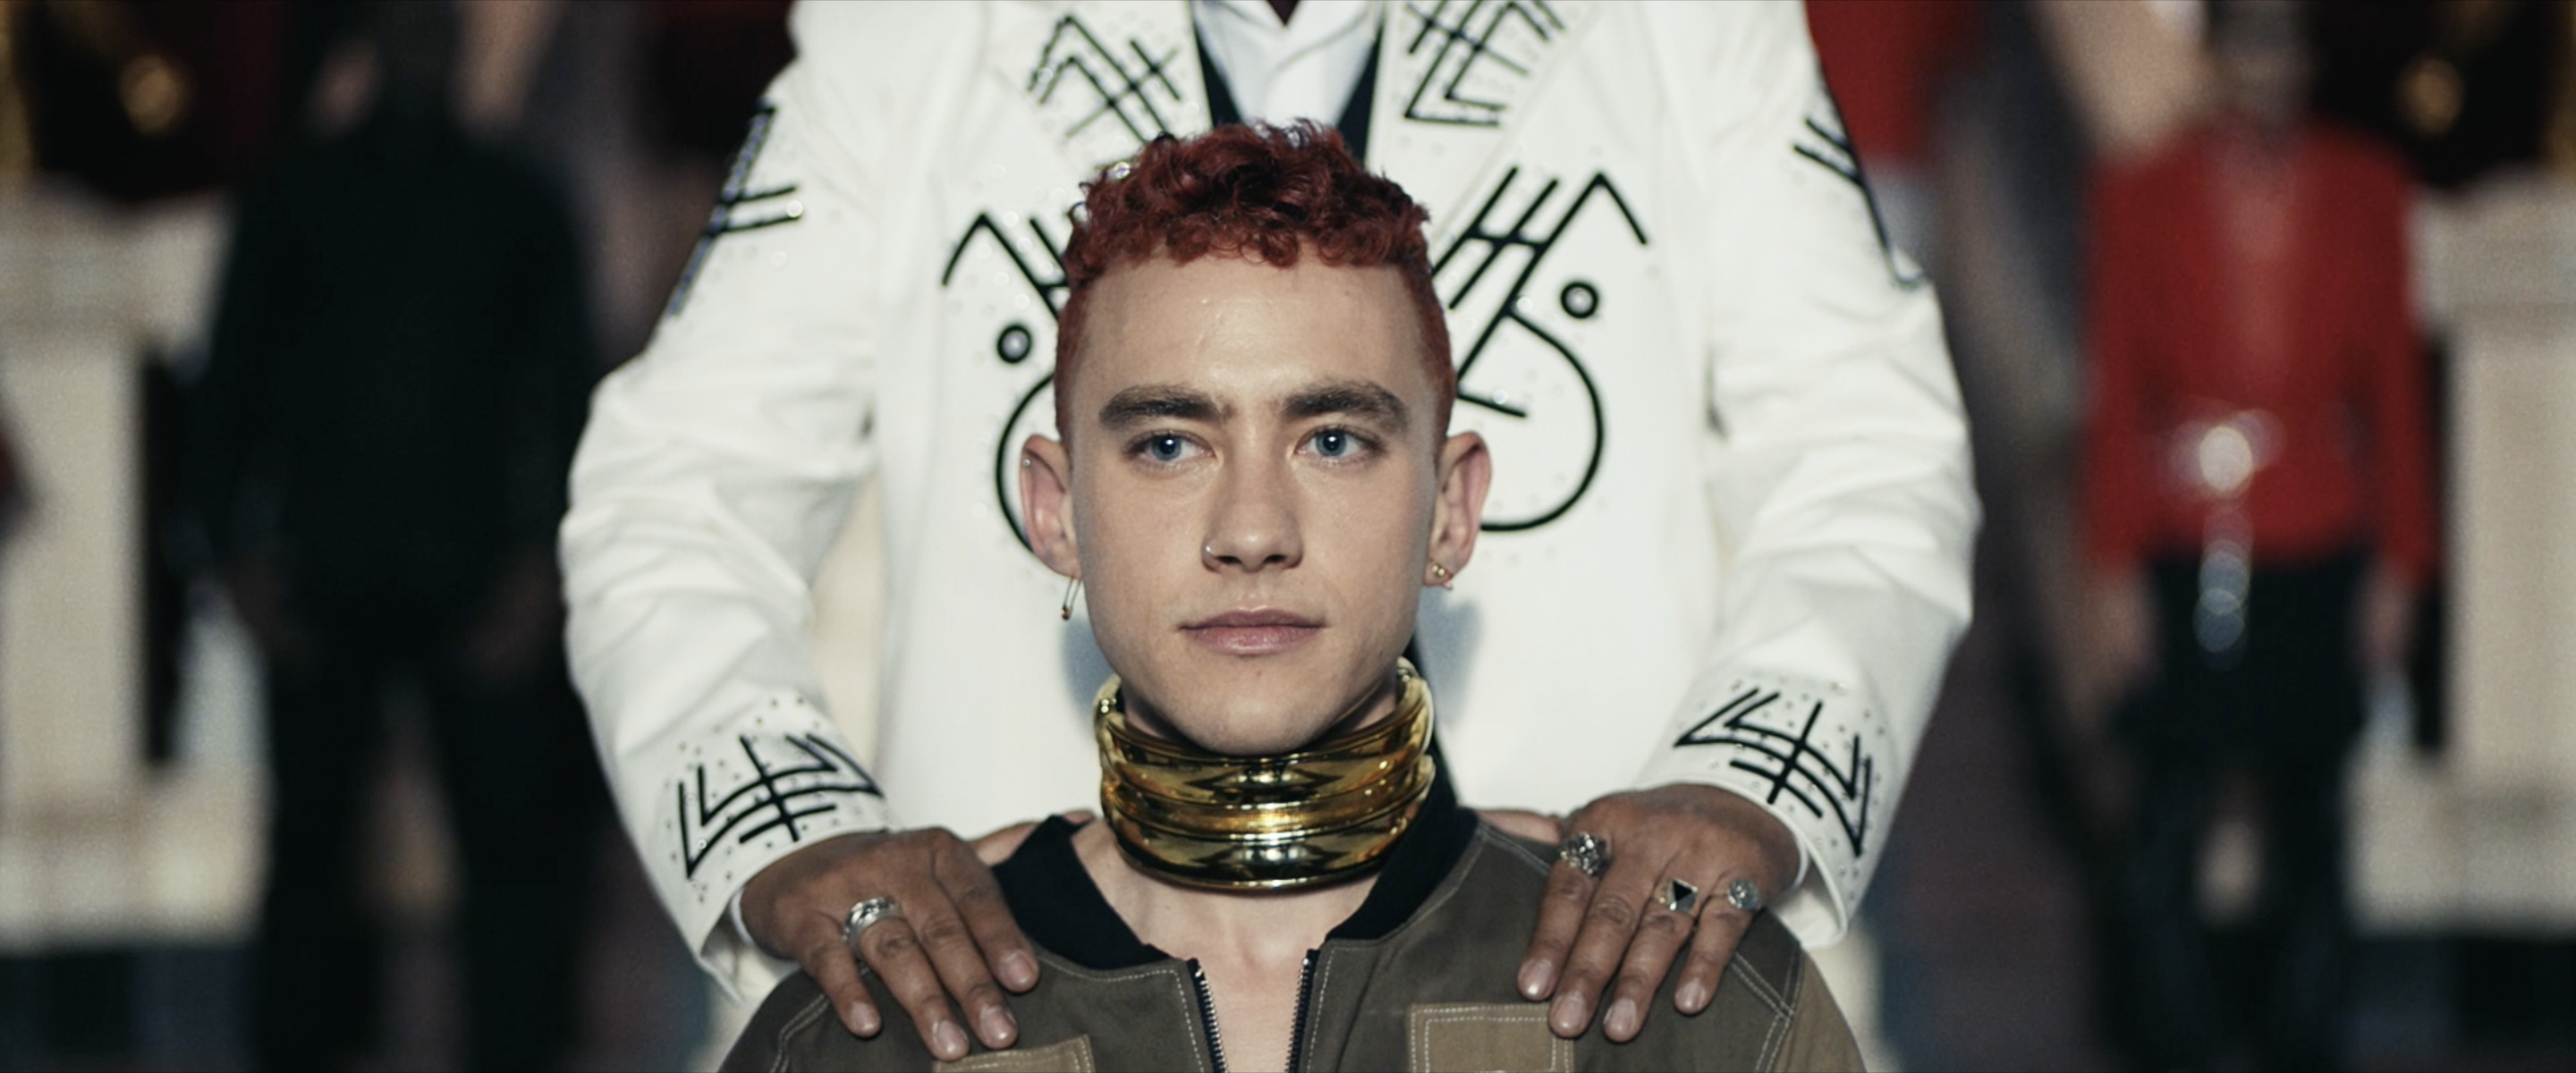 AI Judi Dench Rules Android-Dominated Future in Fred Rowson's Years & Years Film